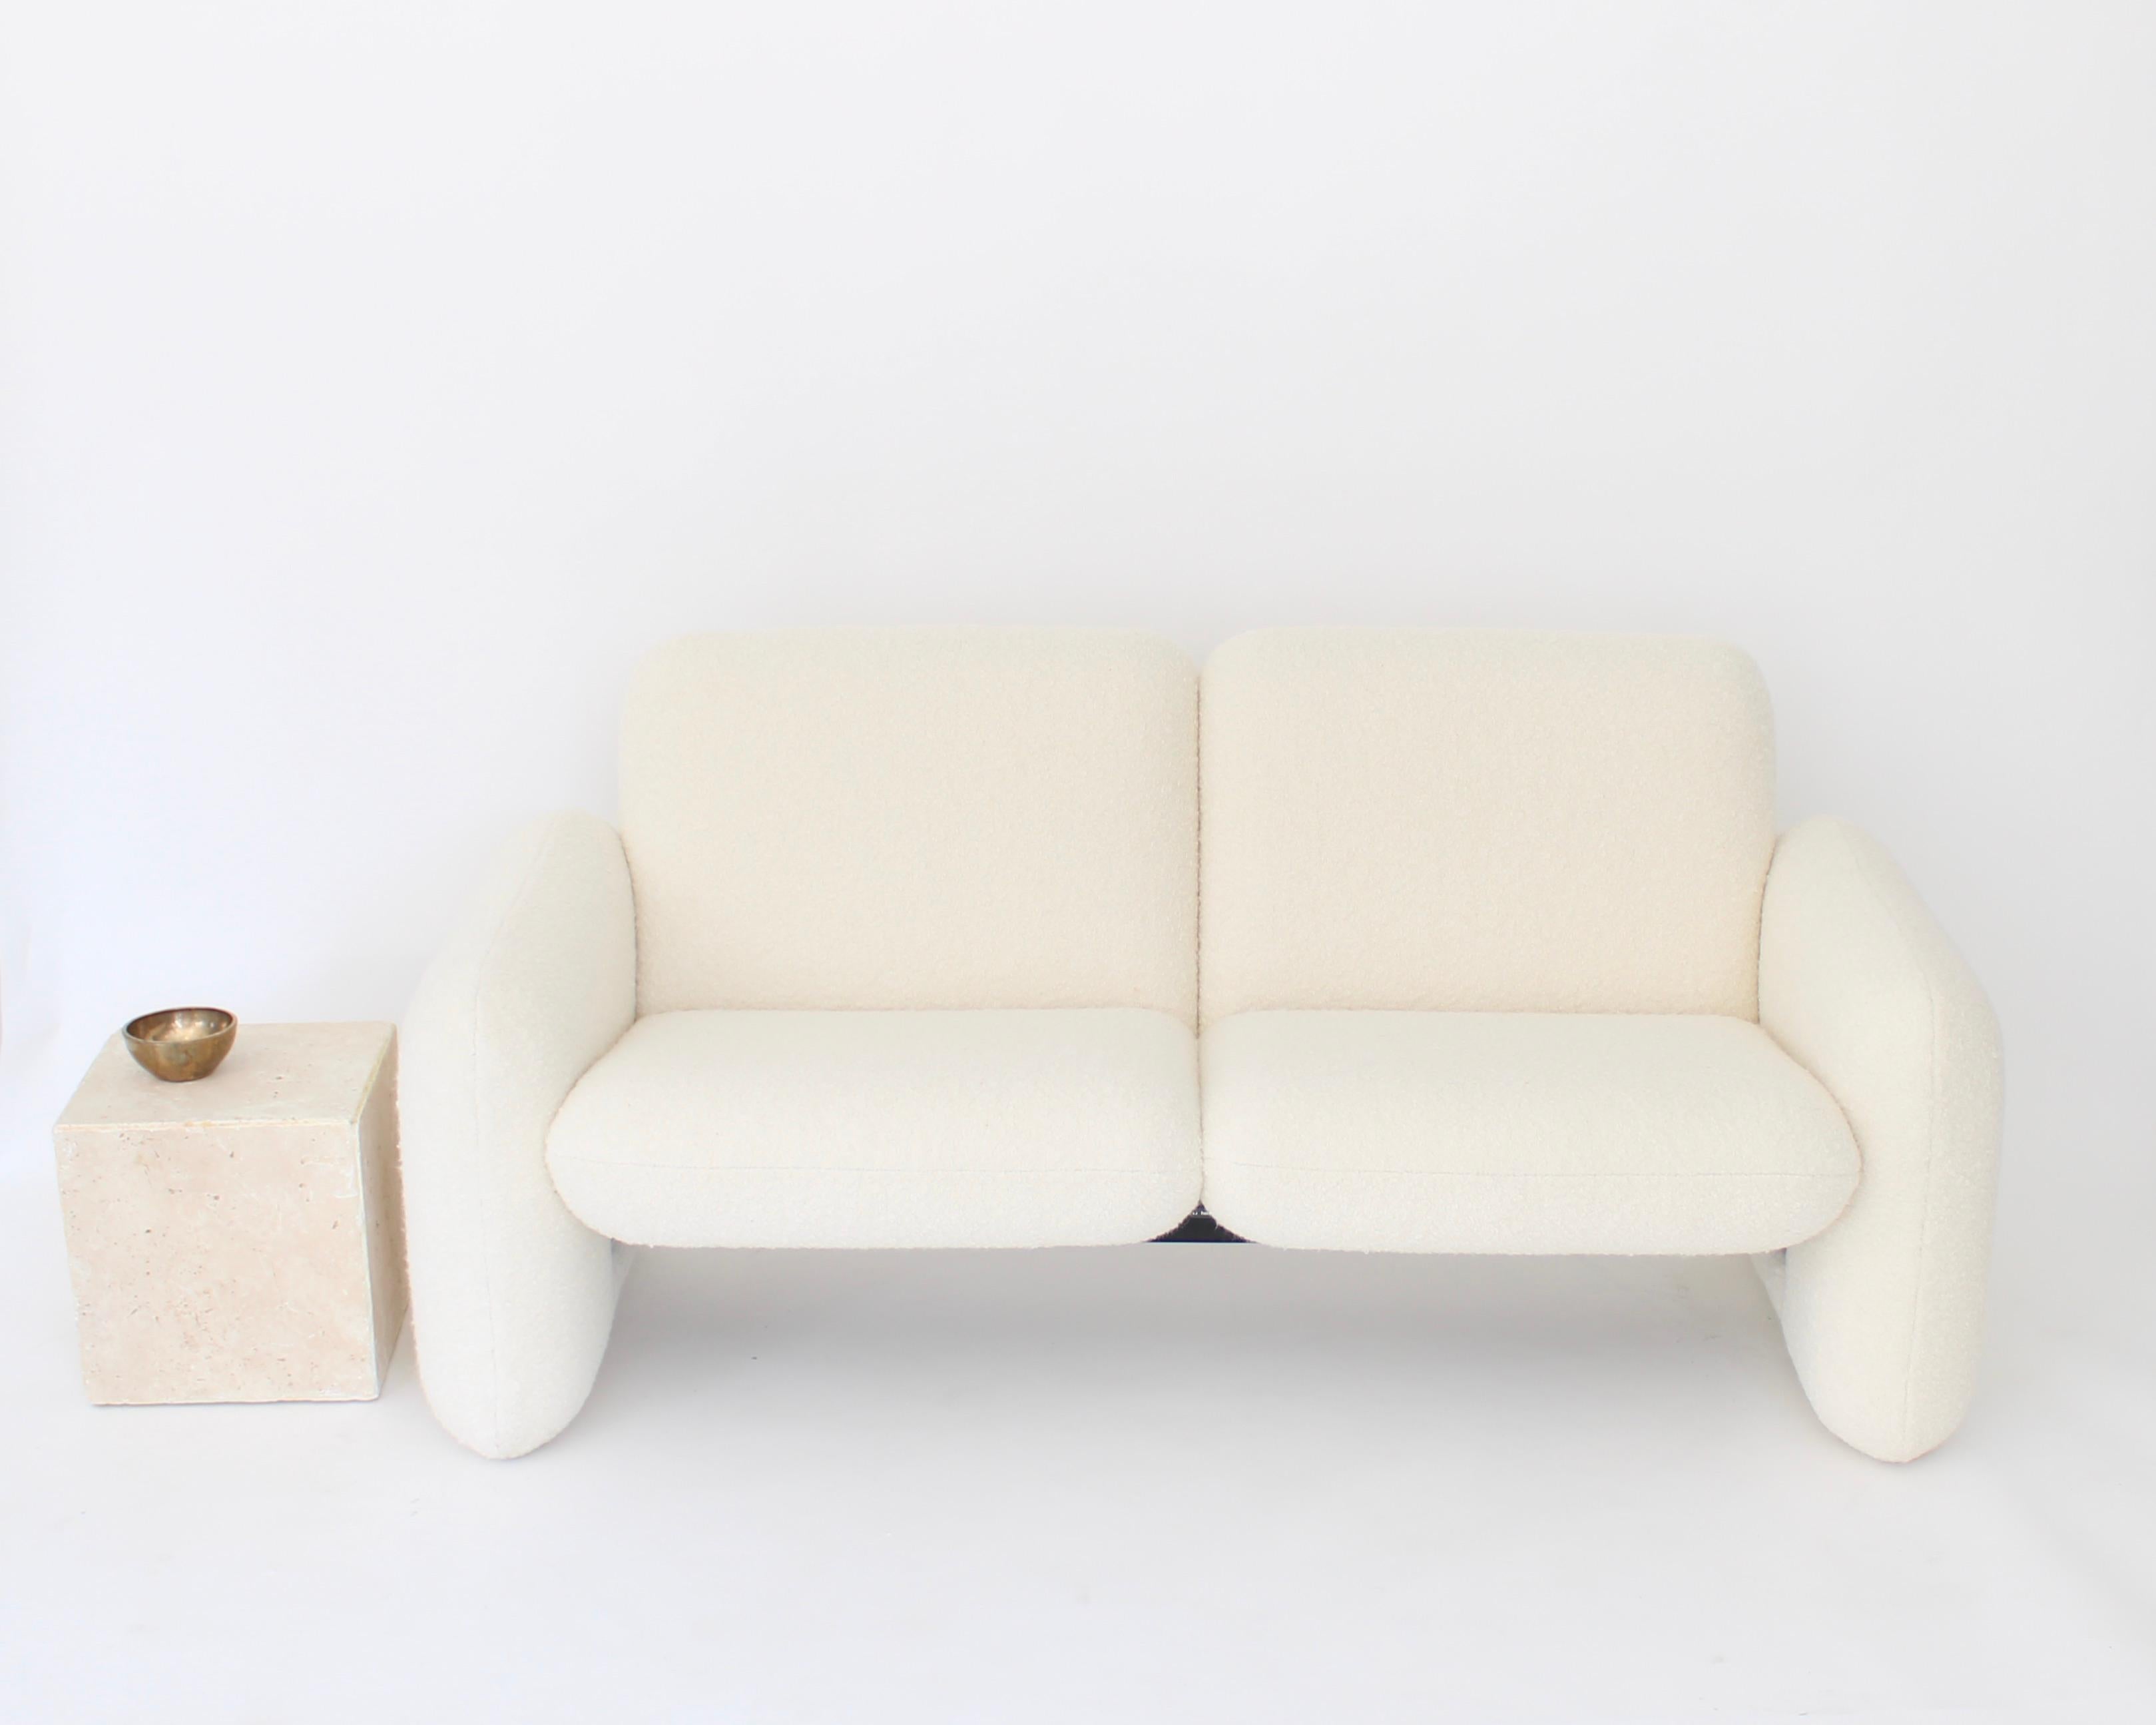 Nicknamed “Chiclet” because of its rounded-edge cushions’ resemblance to pieces of Chiclet gum, this collection which included chairs, settees and sofas was designed by Ray Wilkes, a self-described minimalist for Herman Miller in 1976.
This is a